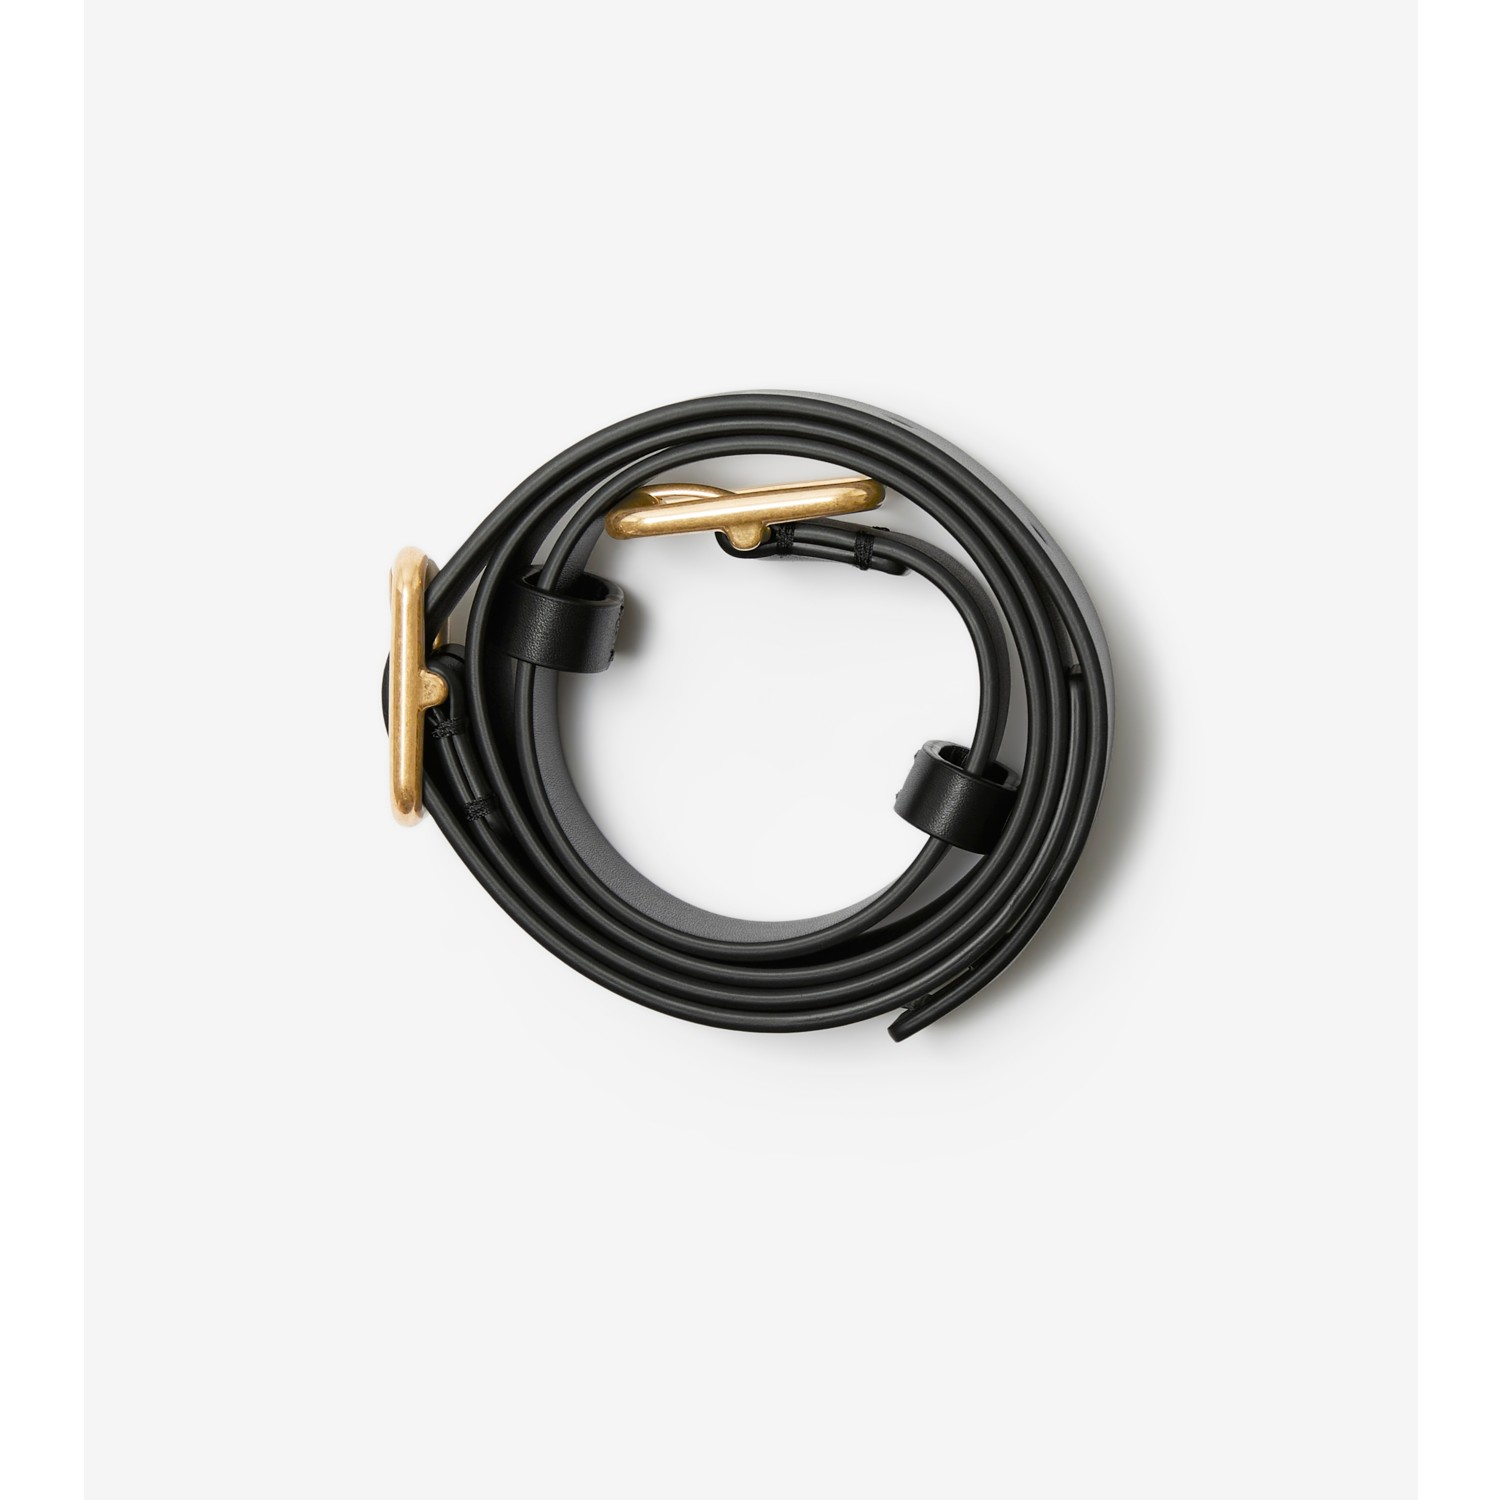 Burberry B-Buckle Leather Belt in Black/Gold